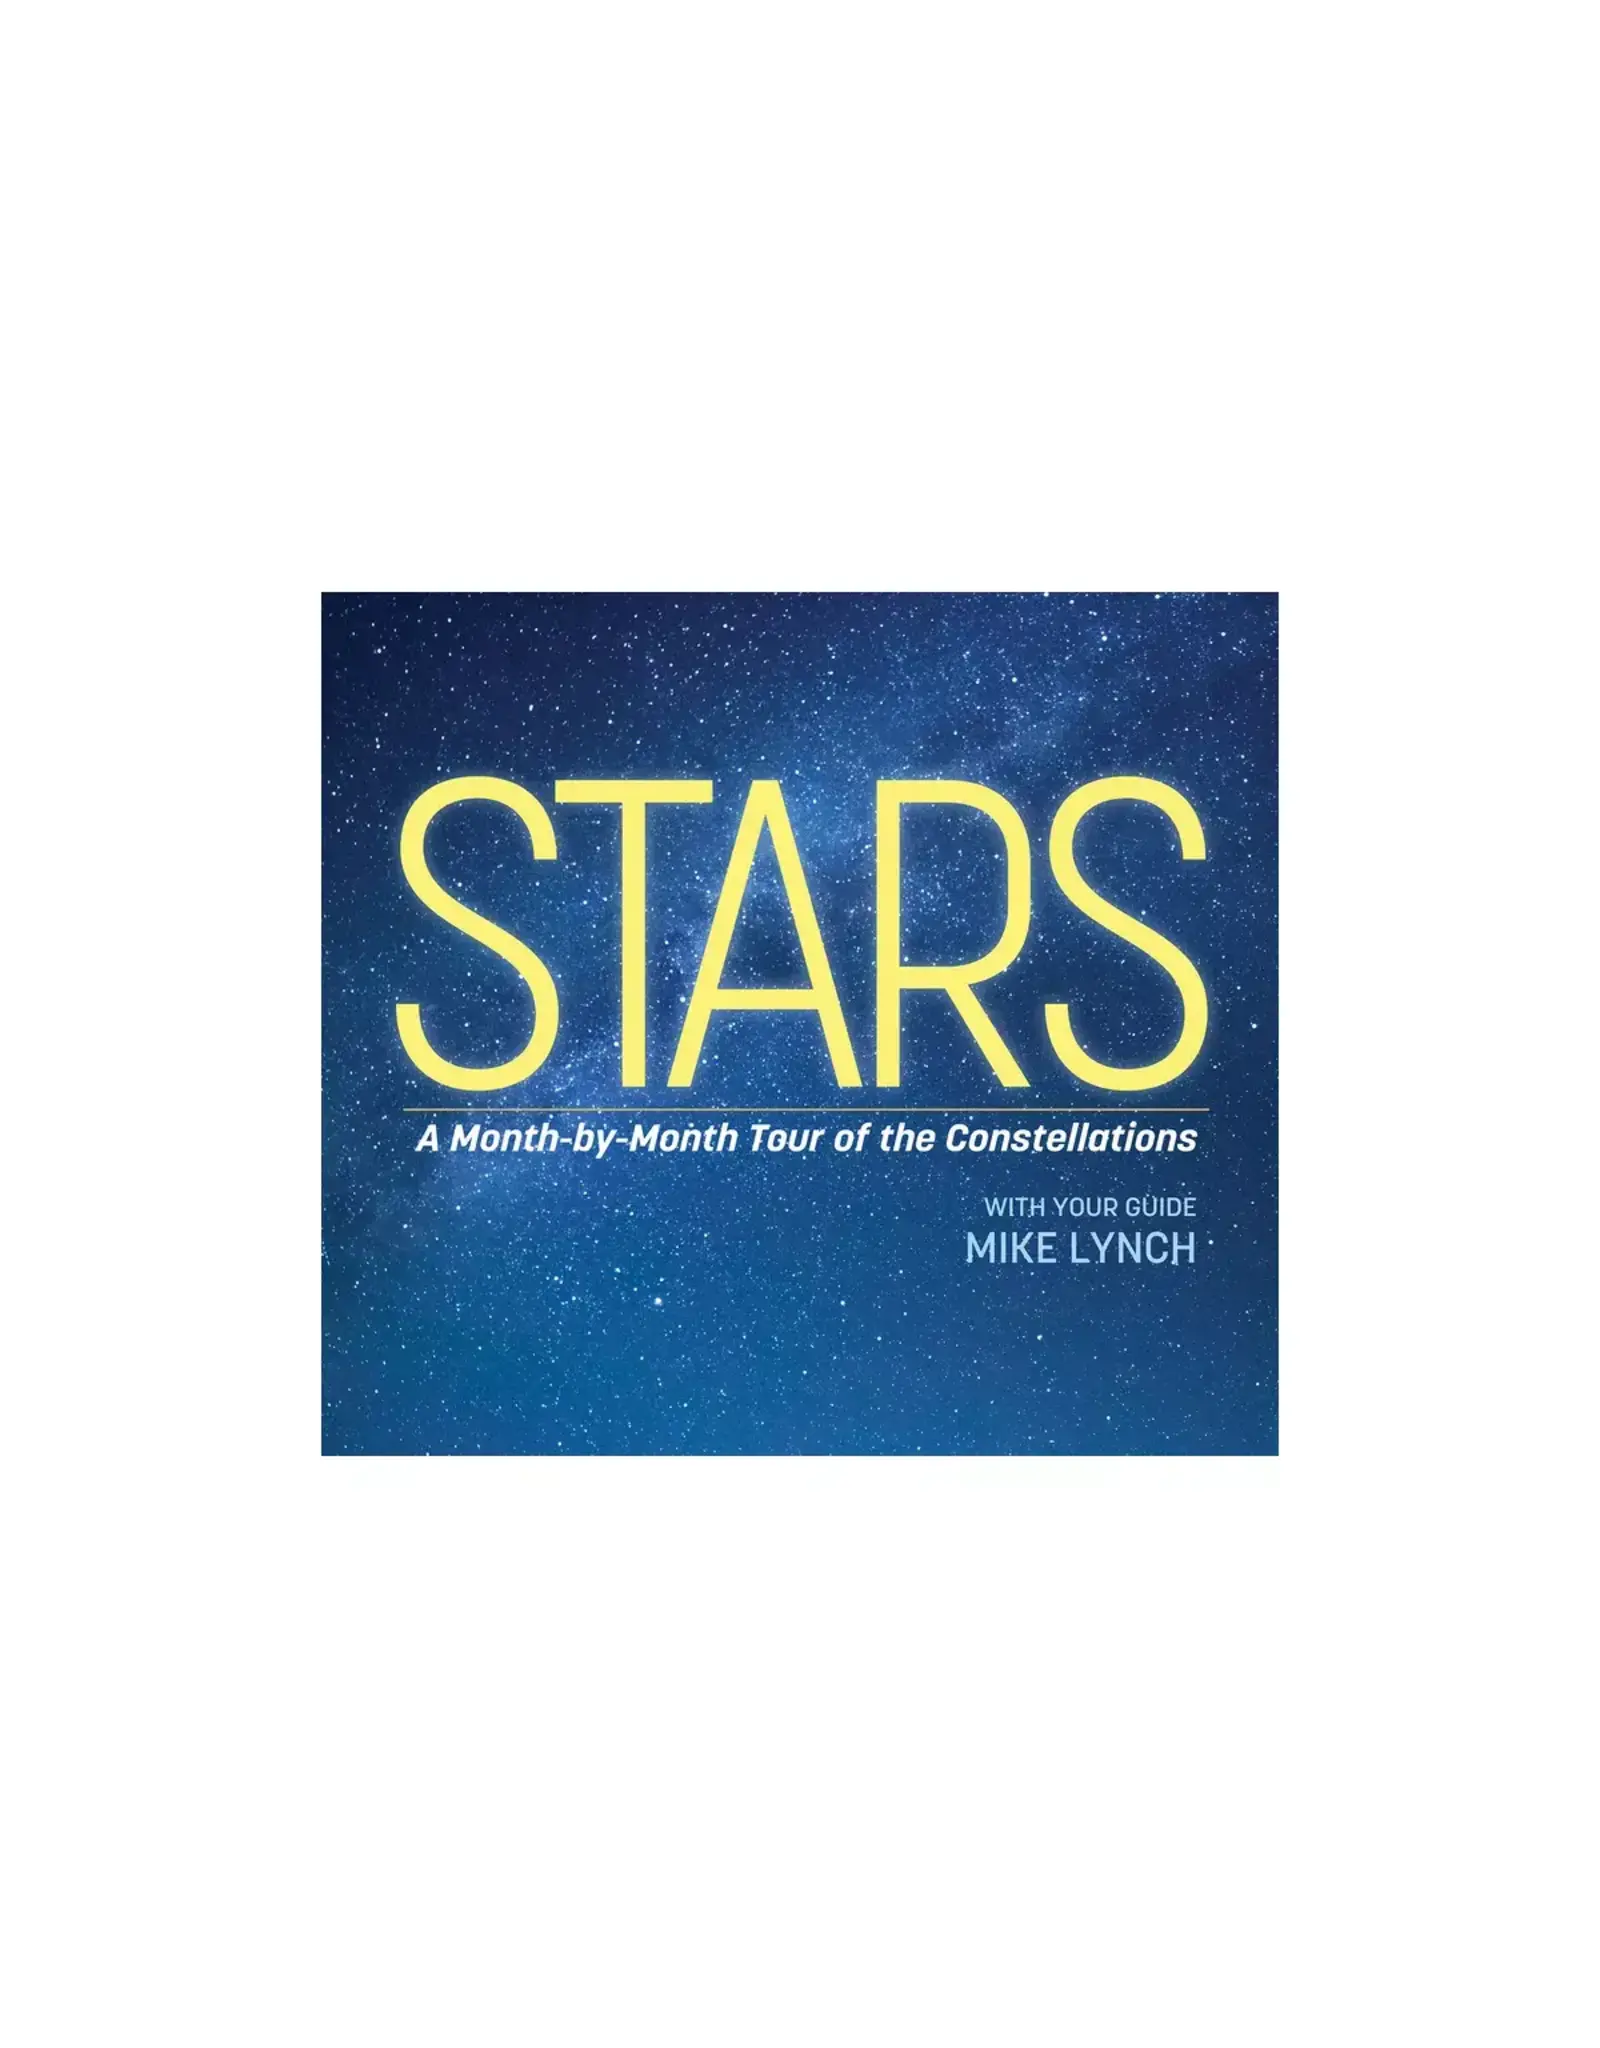 Stars: A Month-by-Month Tour of the Constellations: With Your Guide Mike Lynch, 2nd Edition